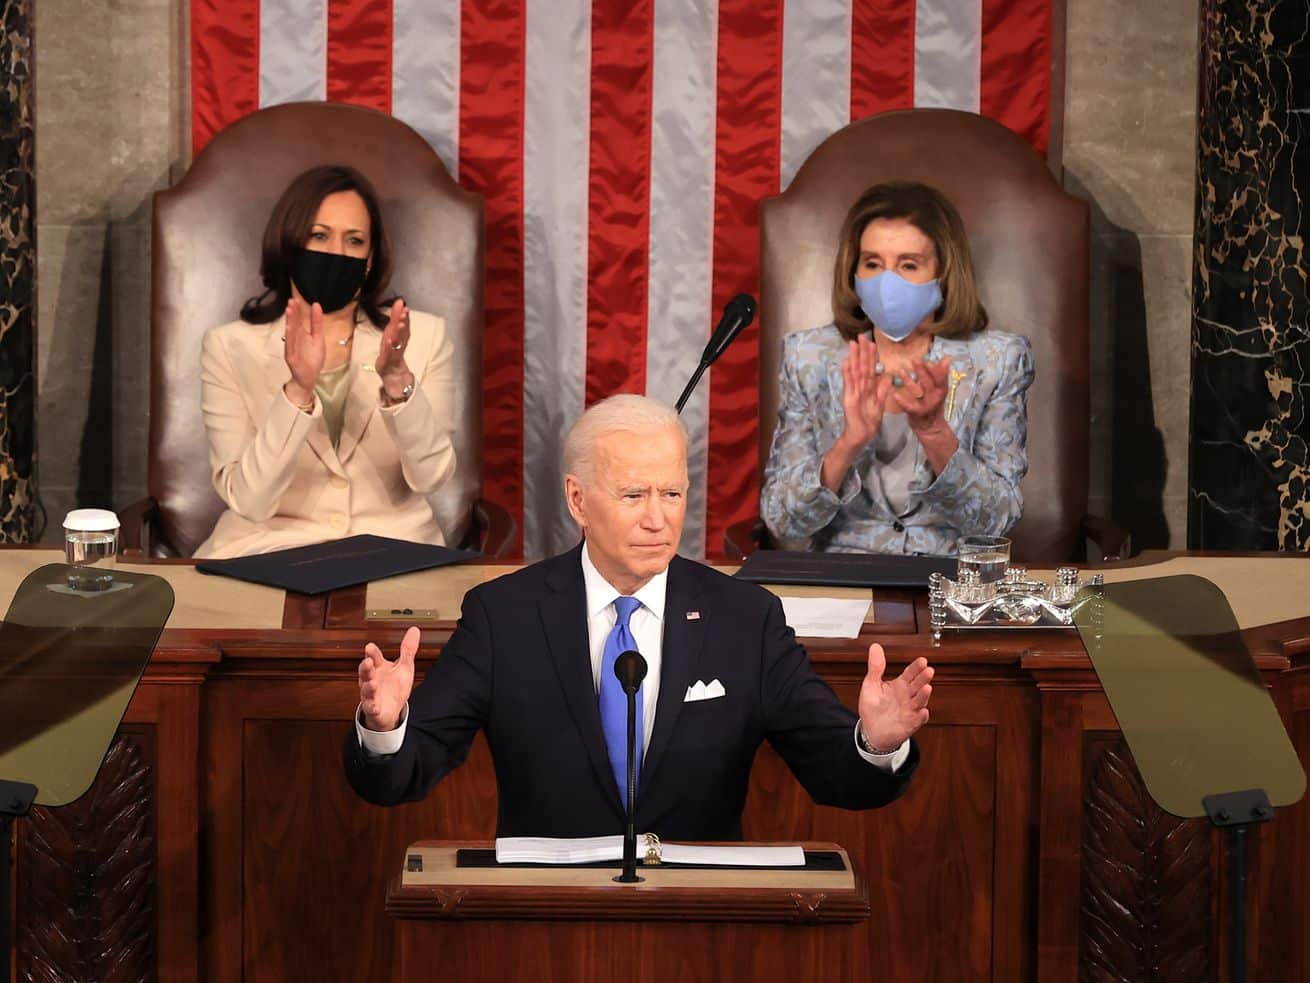 5 winners and 3 losers from President Biden’s first congressional address